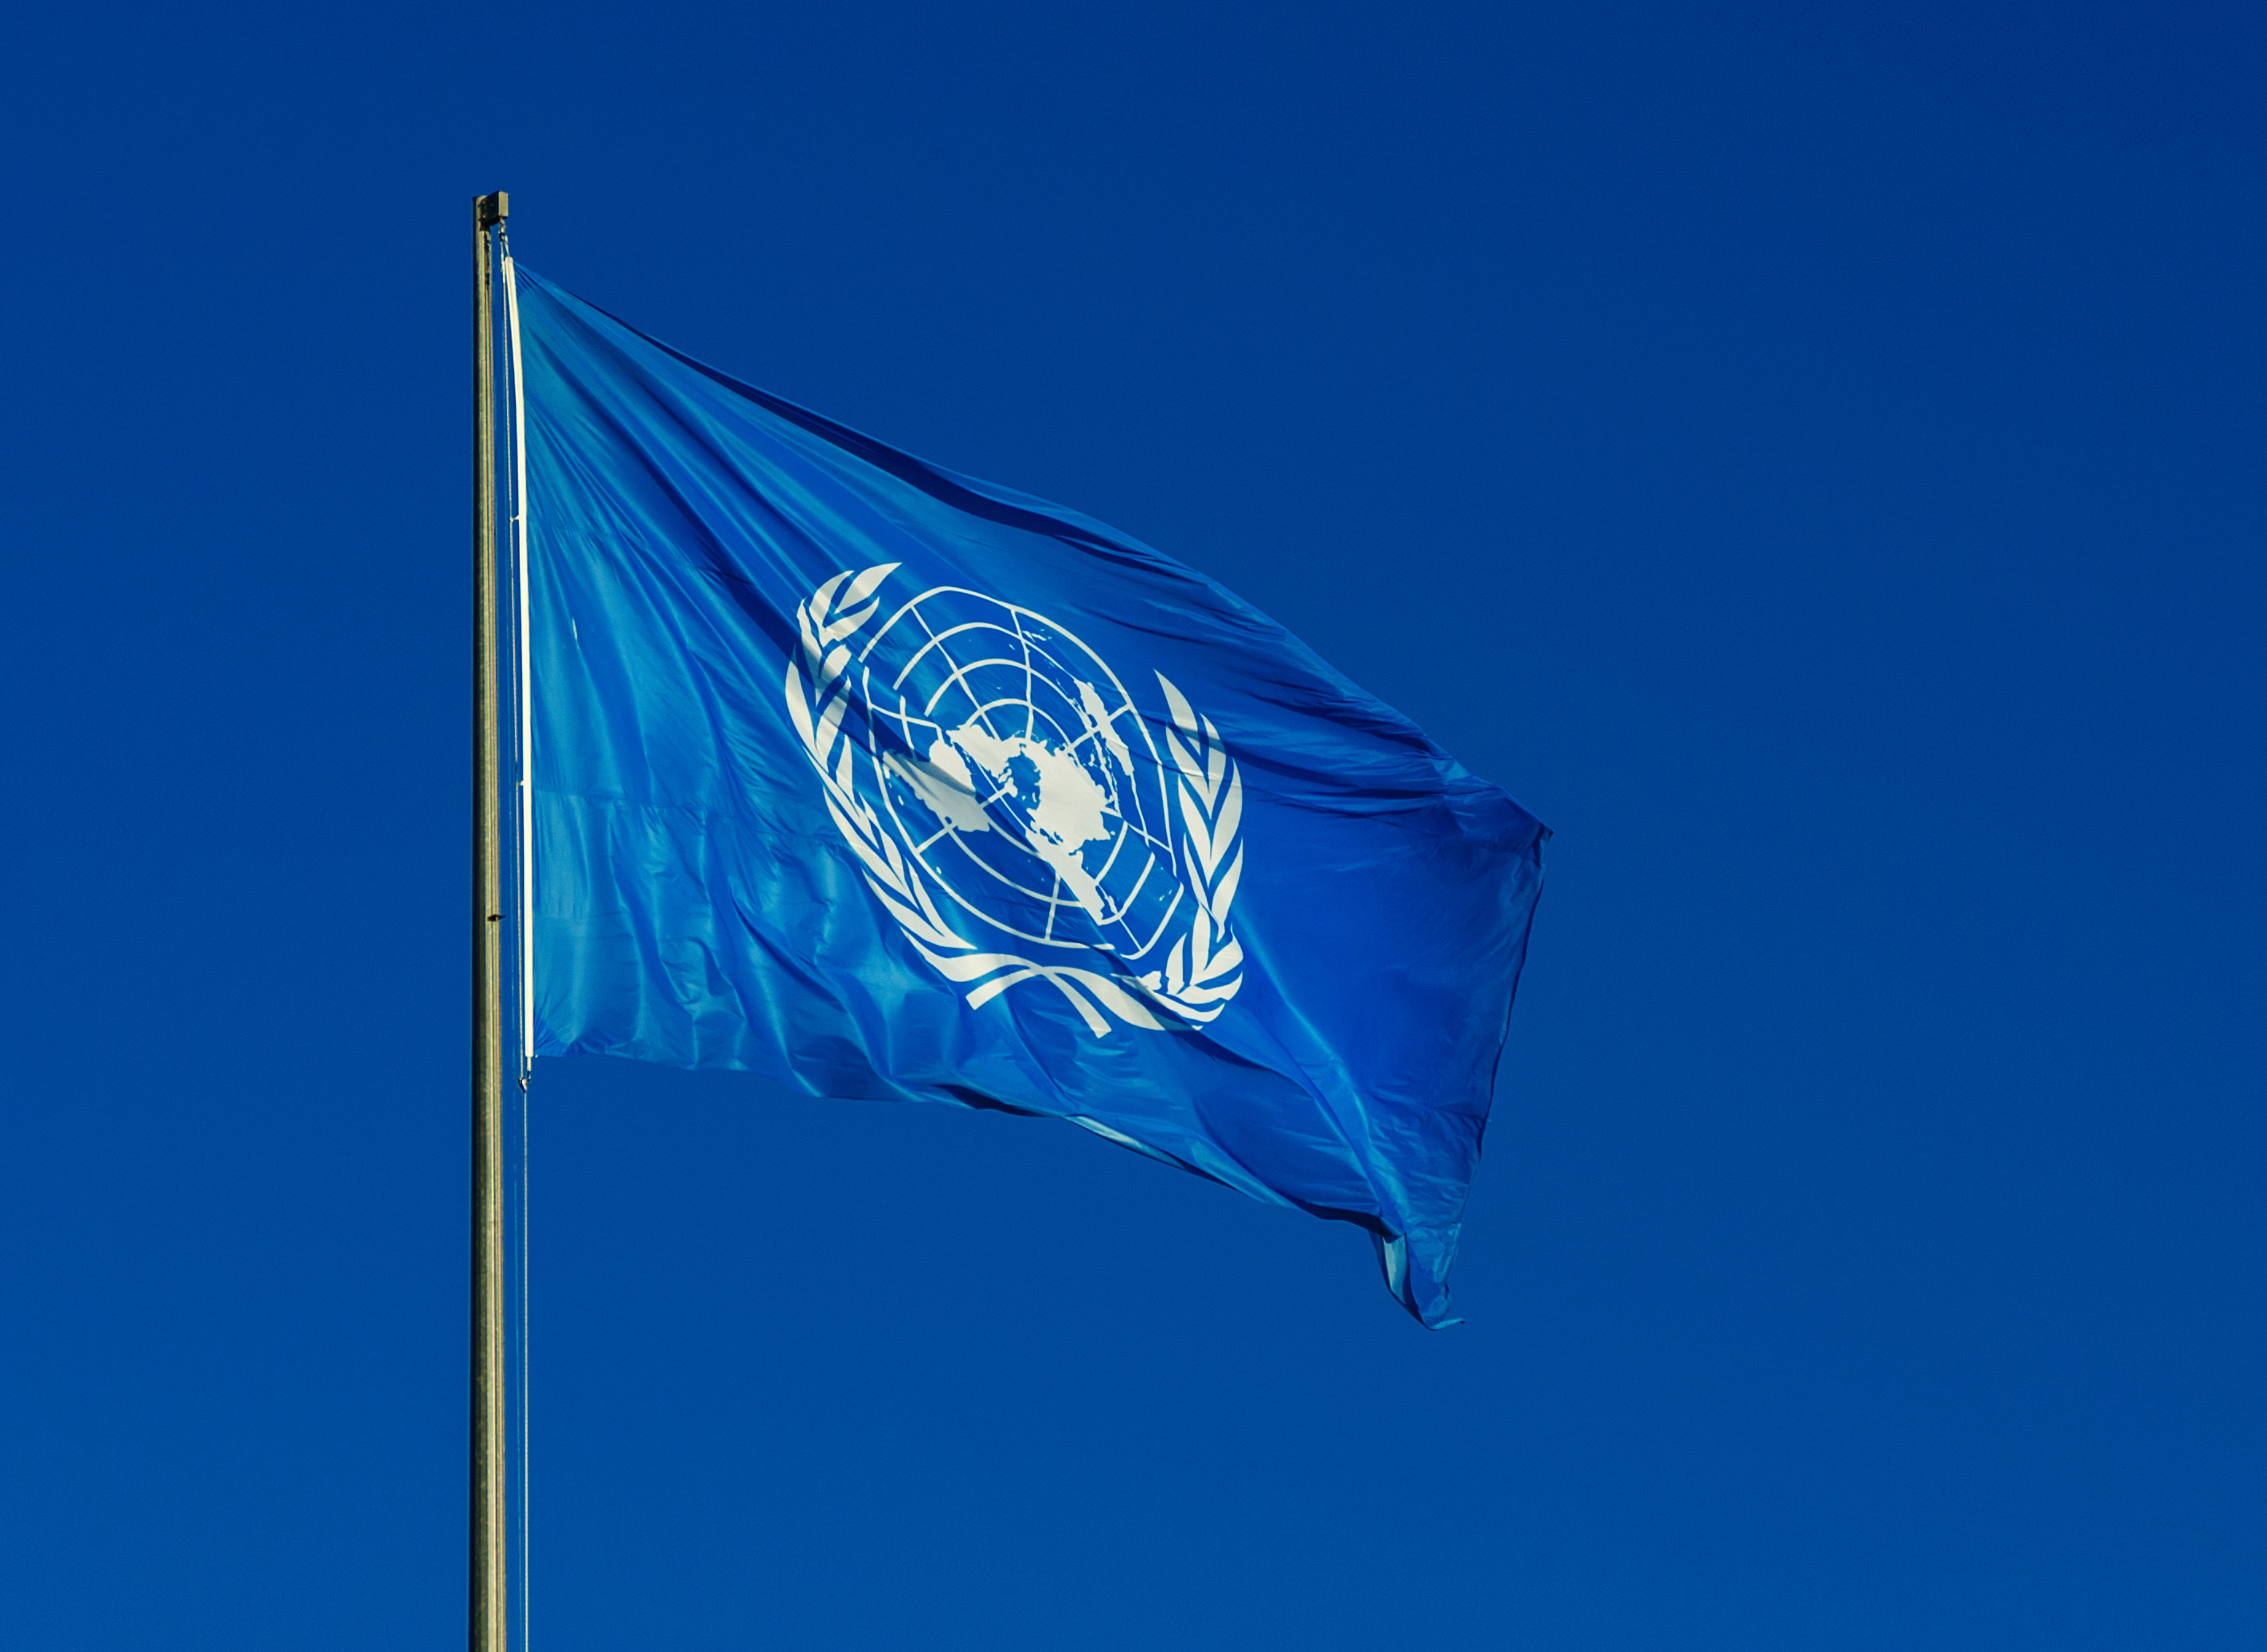 The United Nations formed in 1945. Photo: Shutterstock